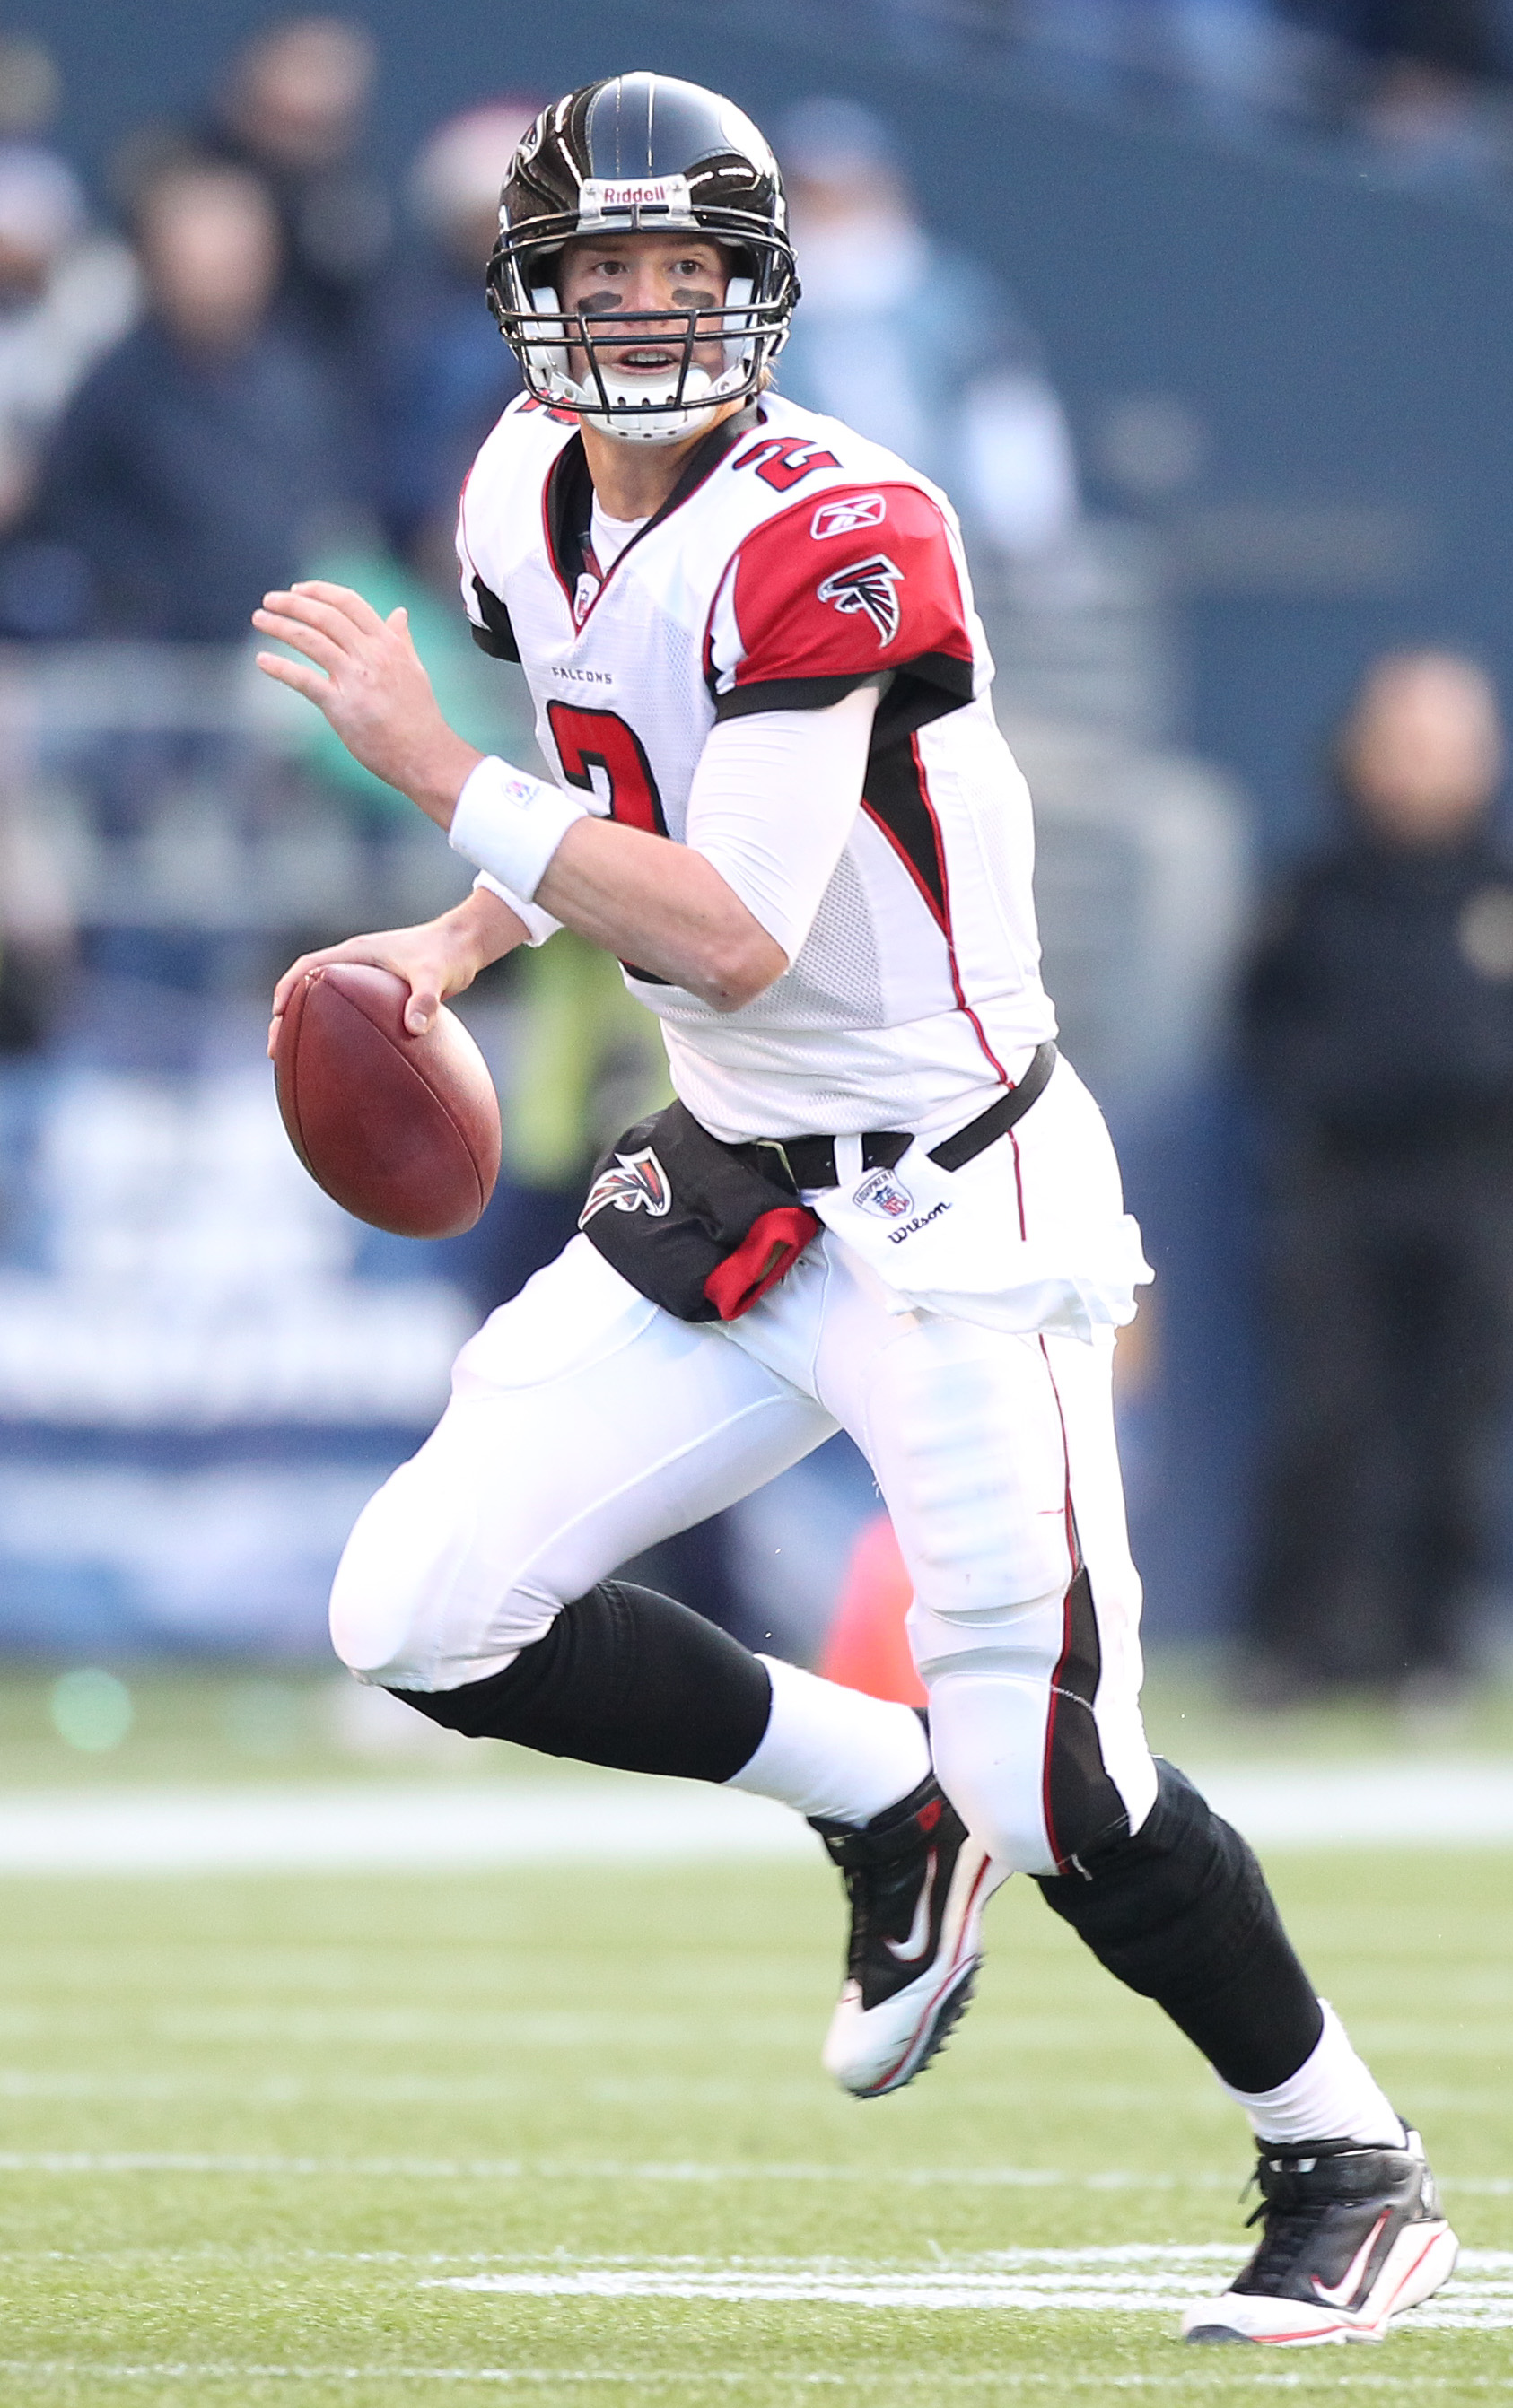 SEATTLE, WA - DECEMBER 19:  Quarterback Matt Ryan #2 of the Atlanta Falcons rushes against the Seattle Seahawks at Qwest Field on December 19, 2010 in Seattle, Washington. (Photo by Otto Greule Jr/Getty Images)